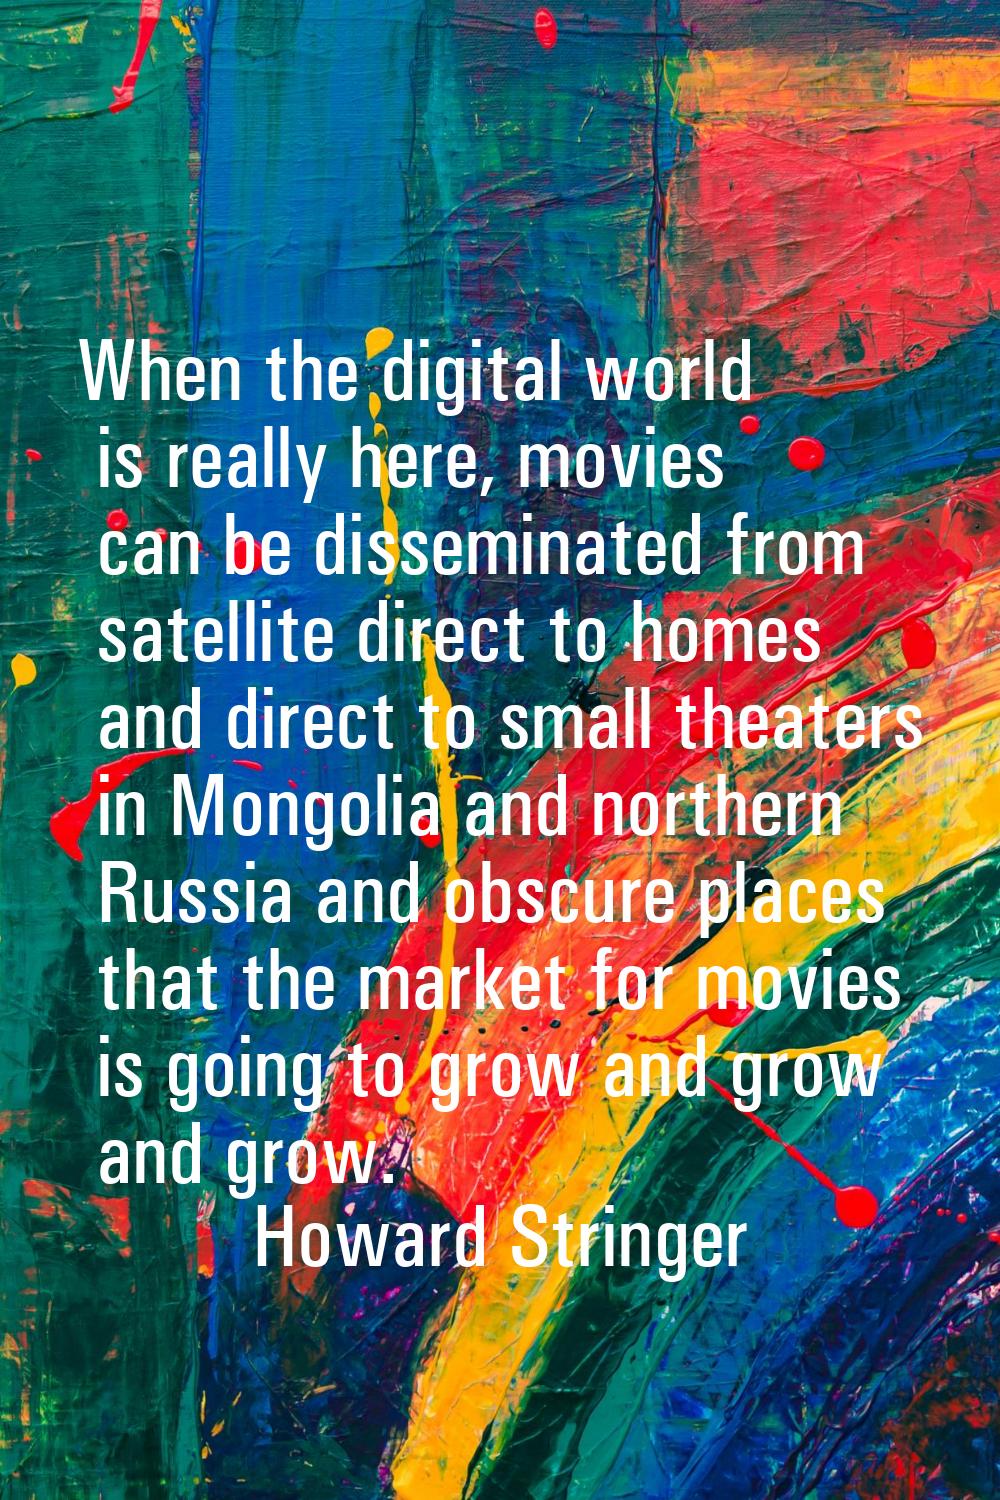 When the digital world is really here, movies can be disseminated from satellite direct to homes an